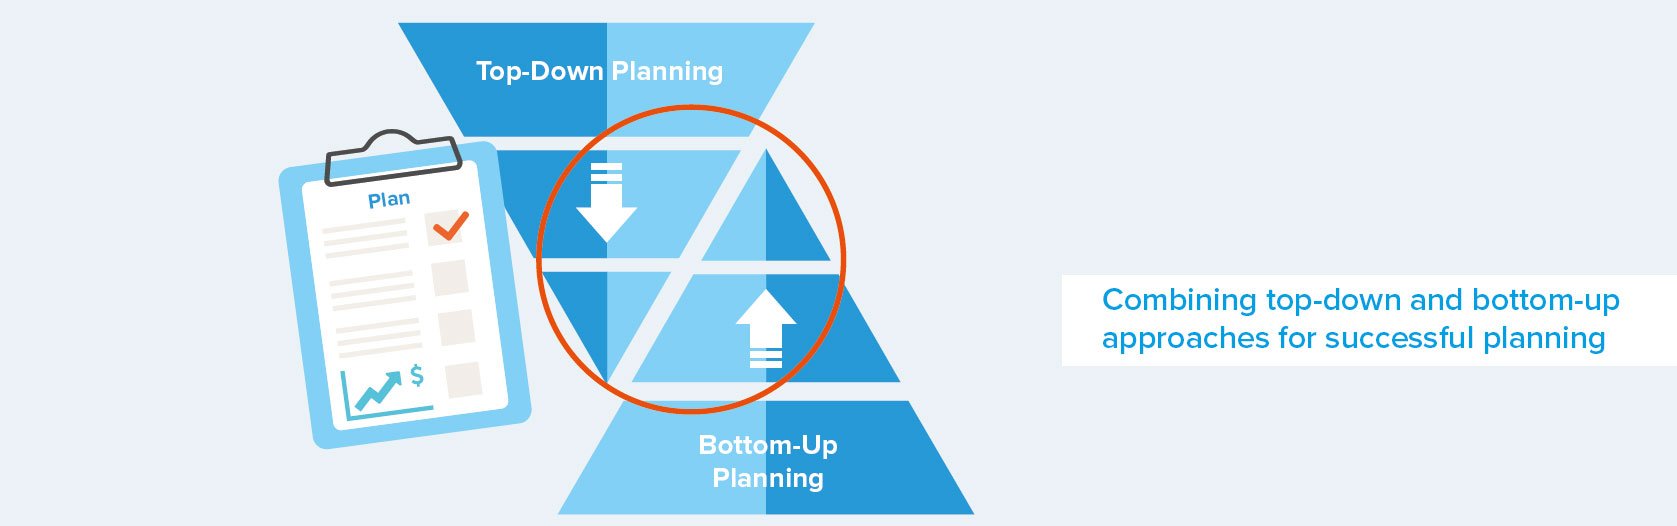 Jedox on Twitter: "Combine bottom-up &amp; top-down approaches for more confidence your #sales #planning process. More tips for #CSO: https://t.co/8Vlkl2qrrx https://t.co/C7ZKR19PvJ" / Twitter